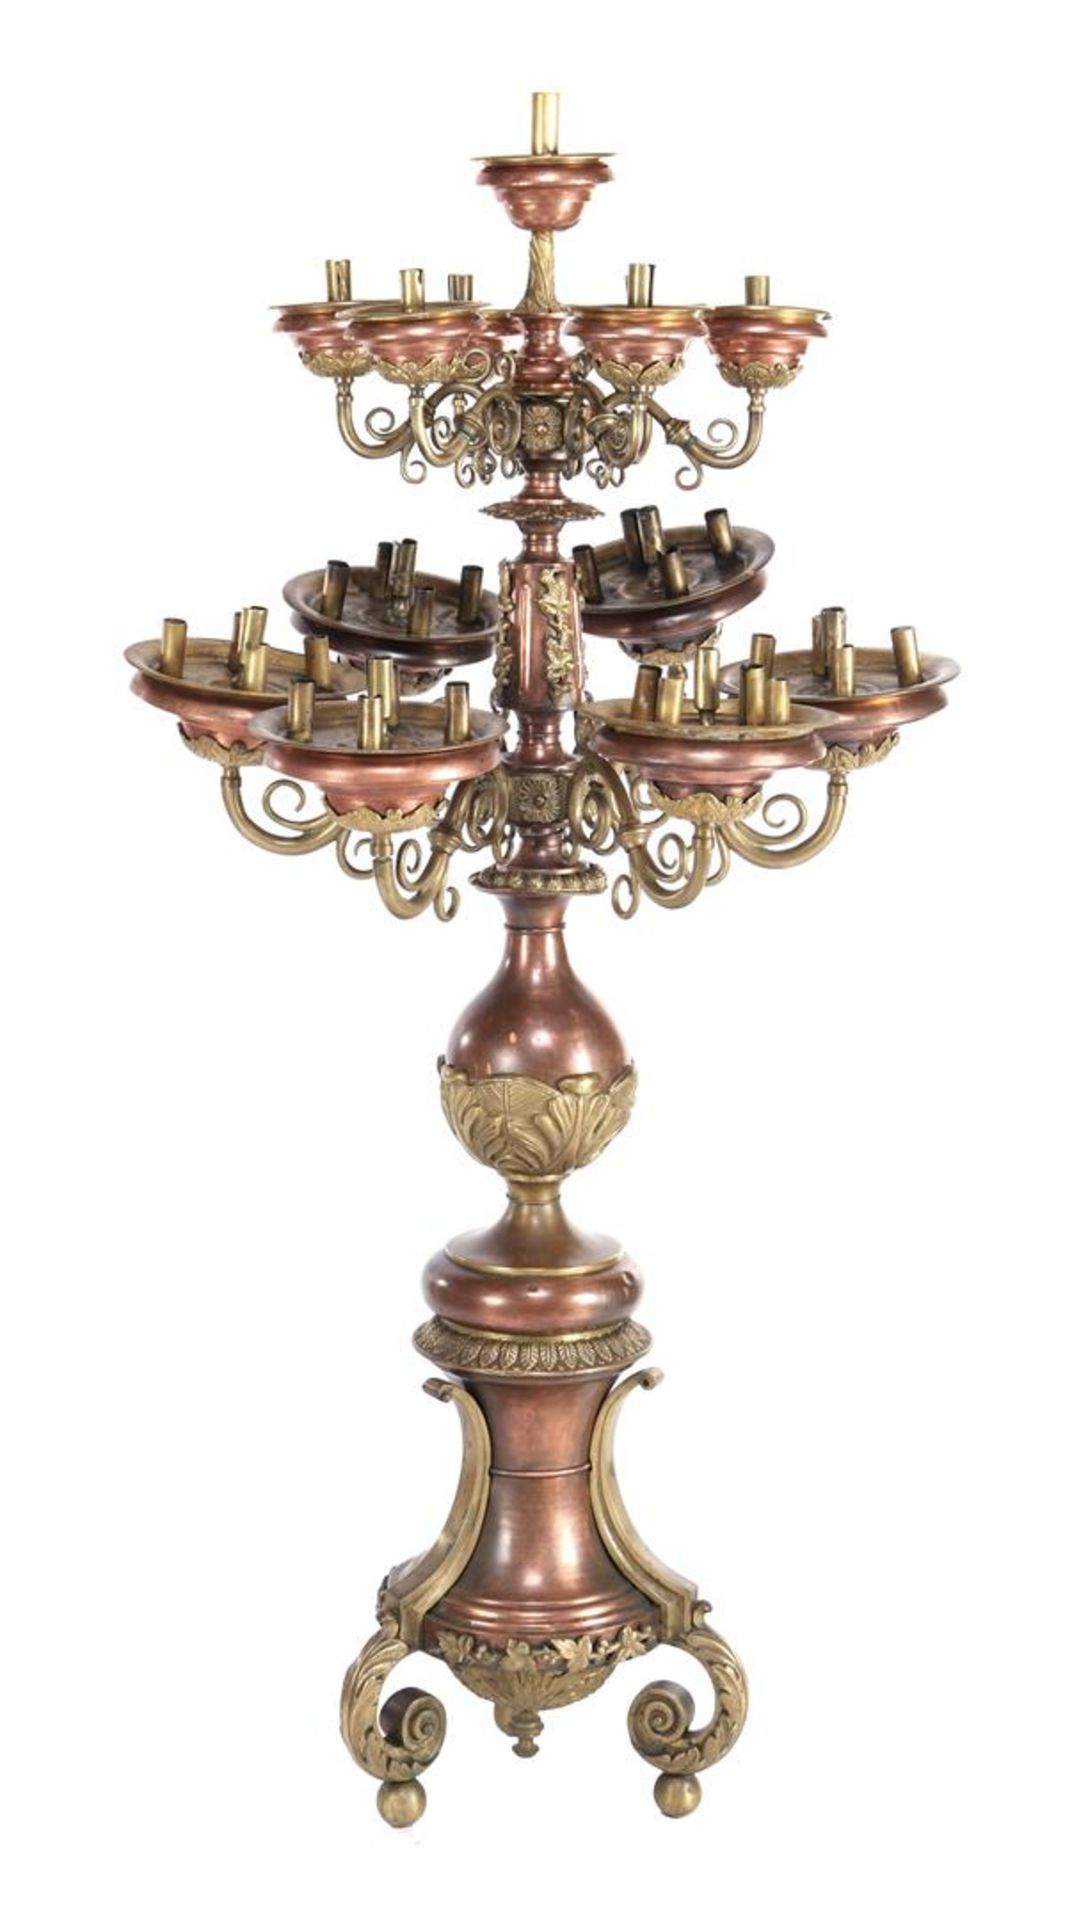 Copper richly crafted 12-armed standing candlestick